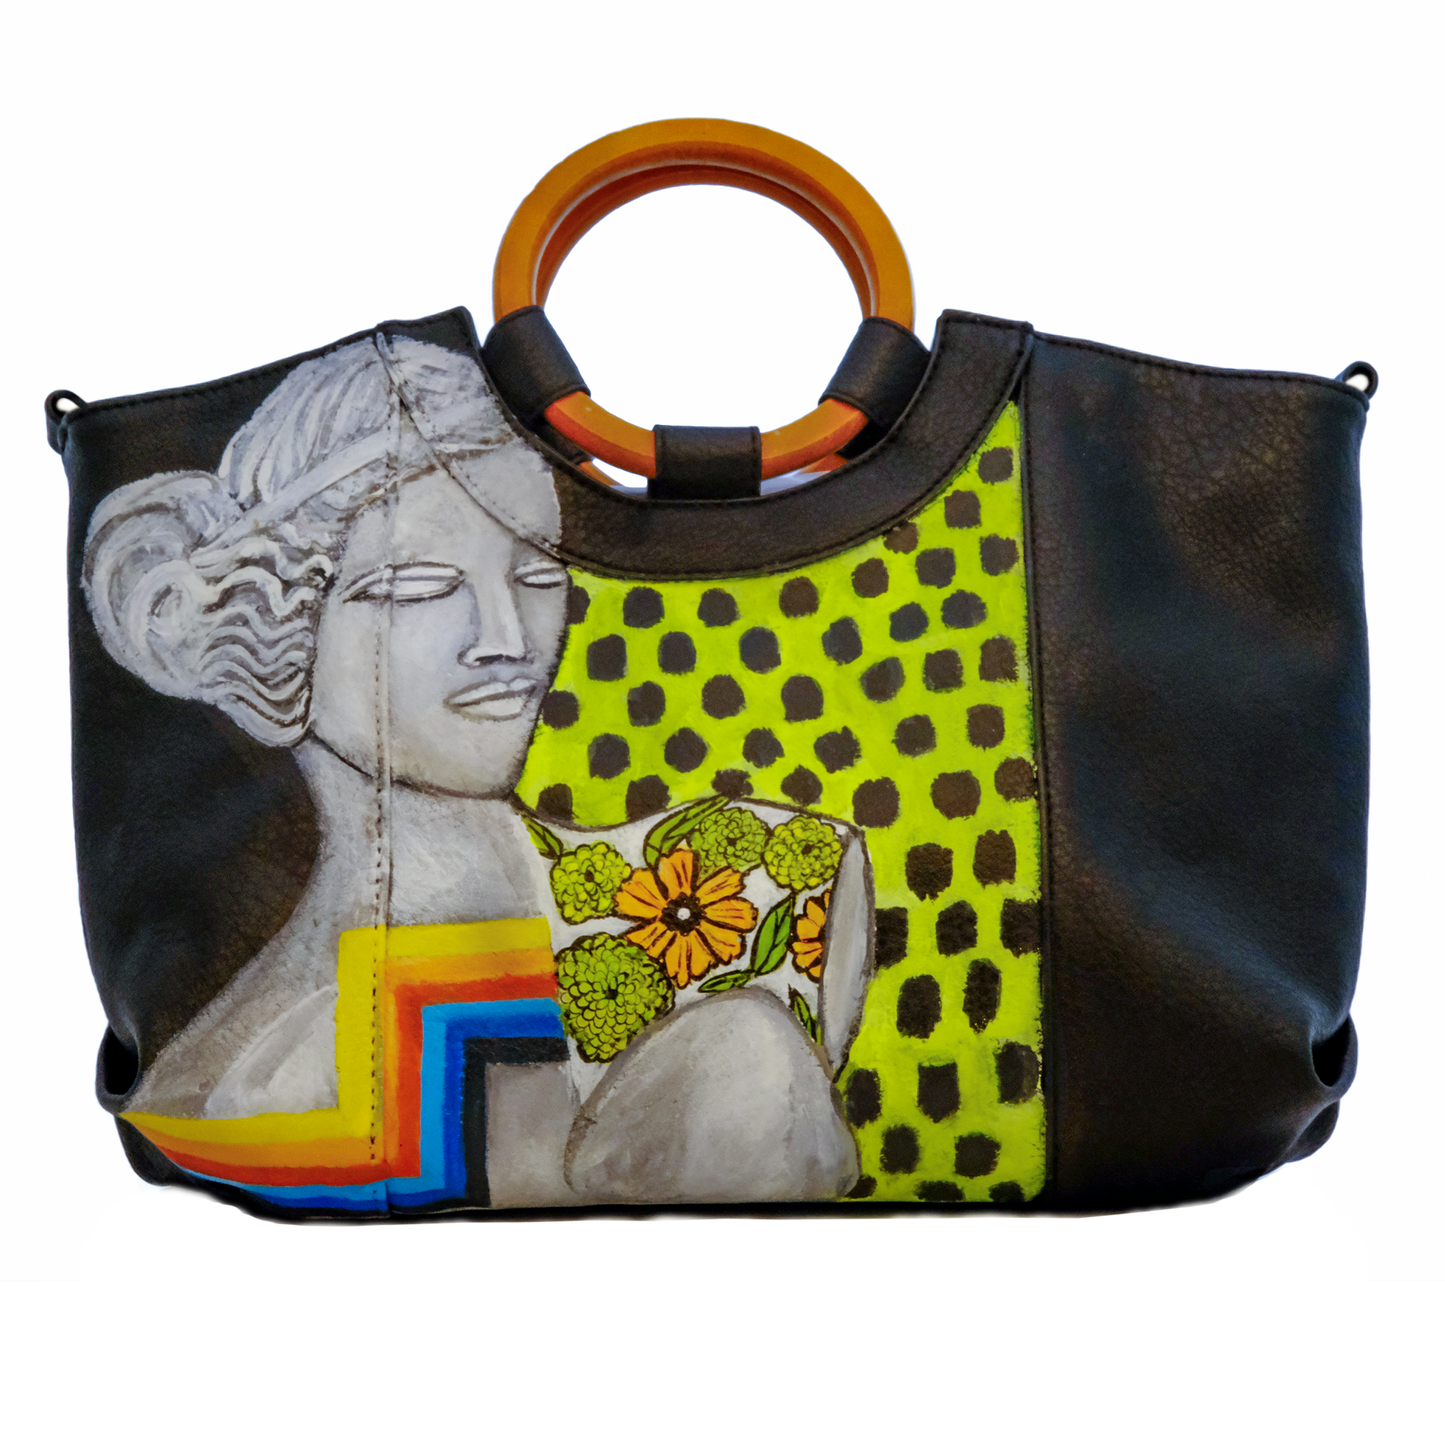 Whitney - Anthopologie Cross-body/Hand Bag - Hand Painted by Temporarily Not Famous